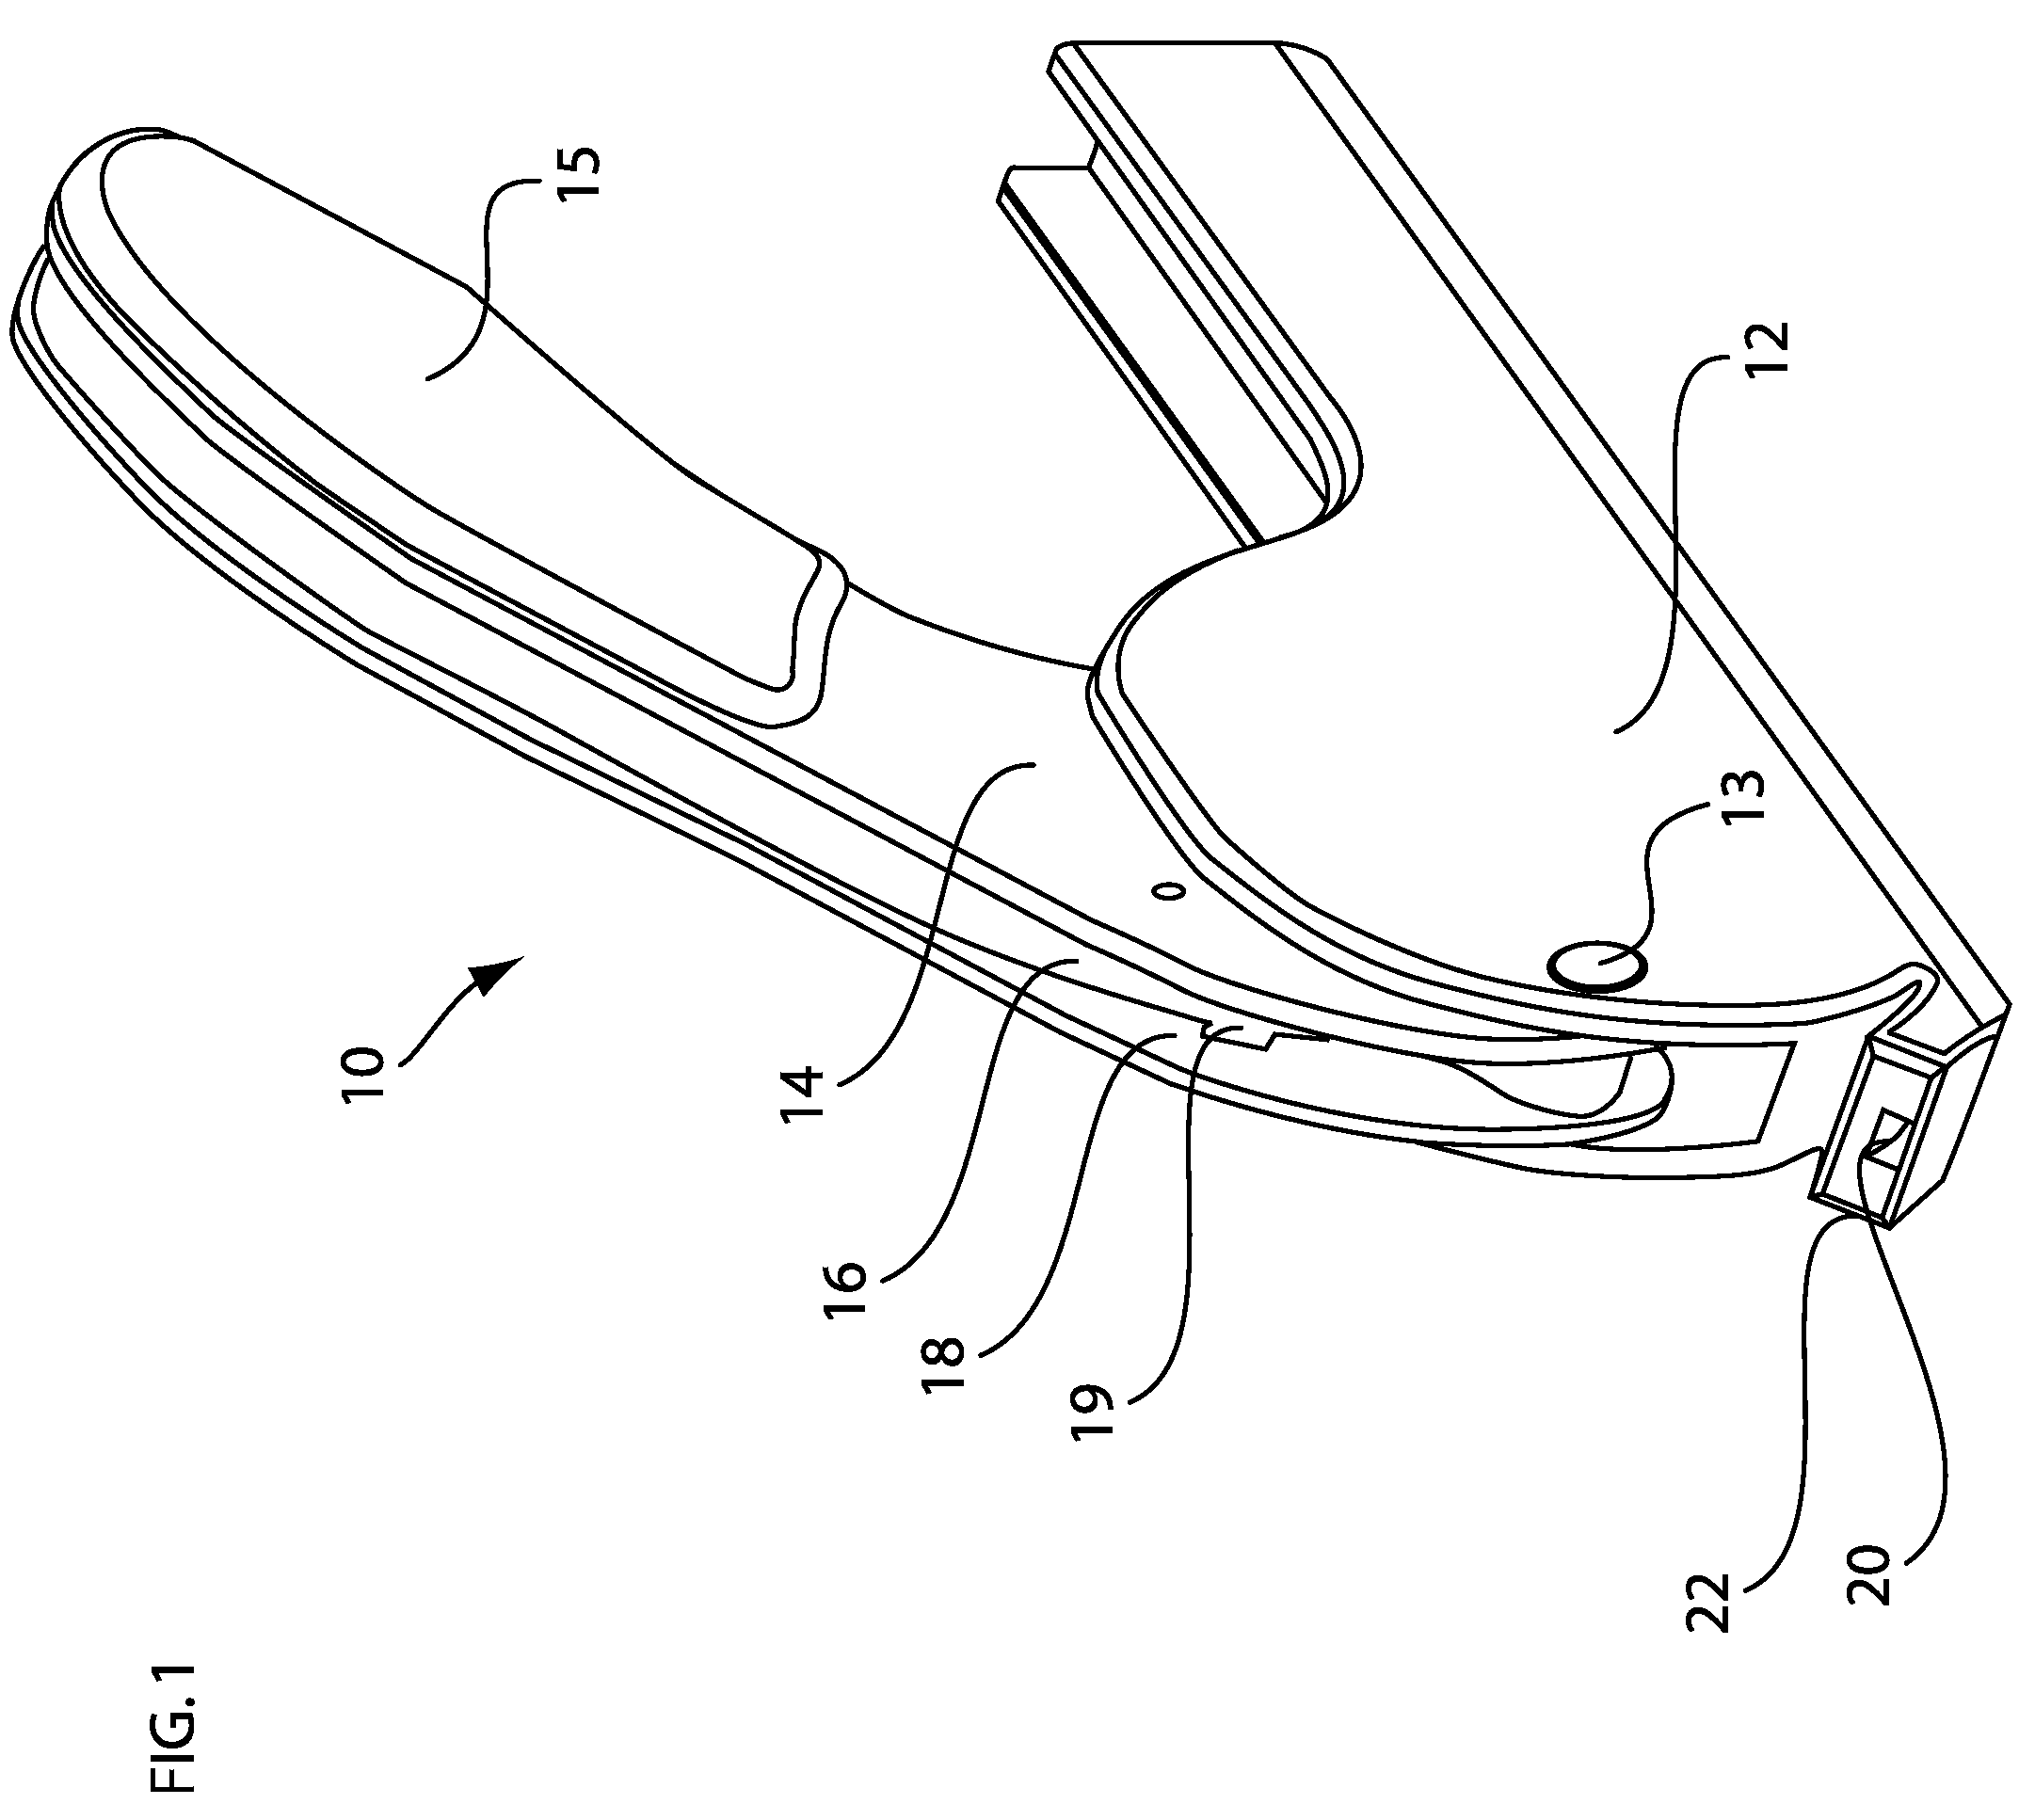 Thoracic closure device and methods